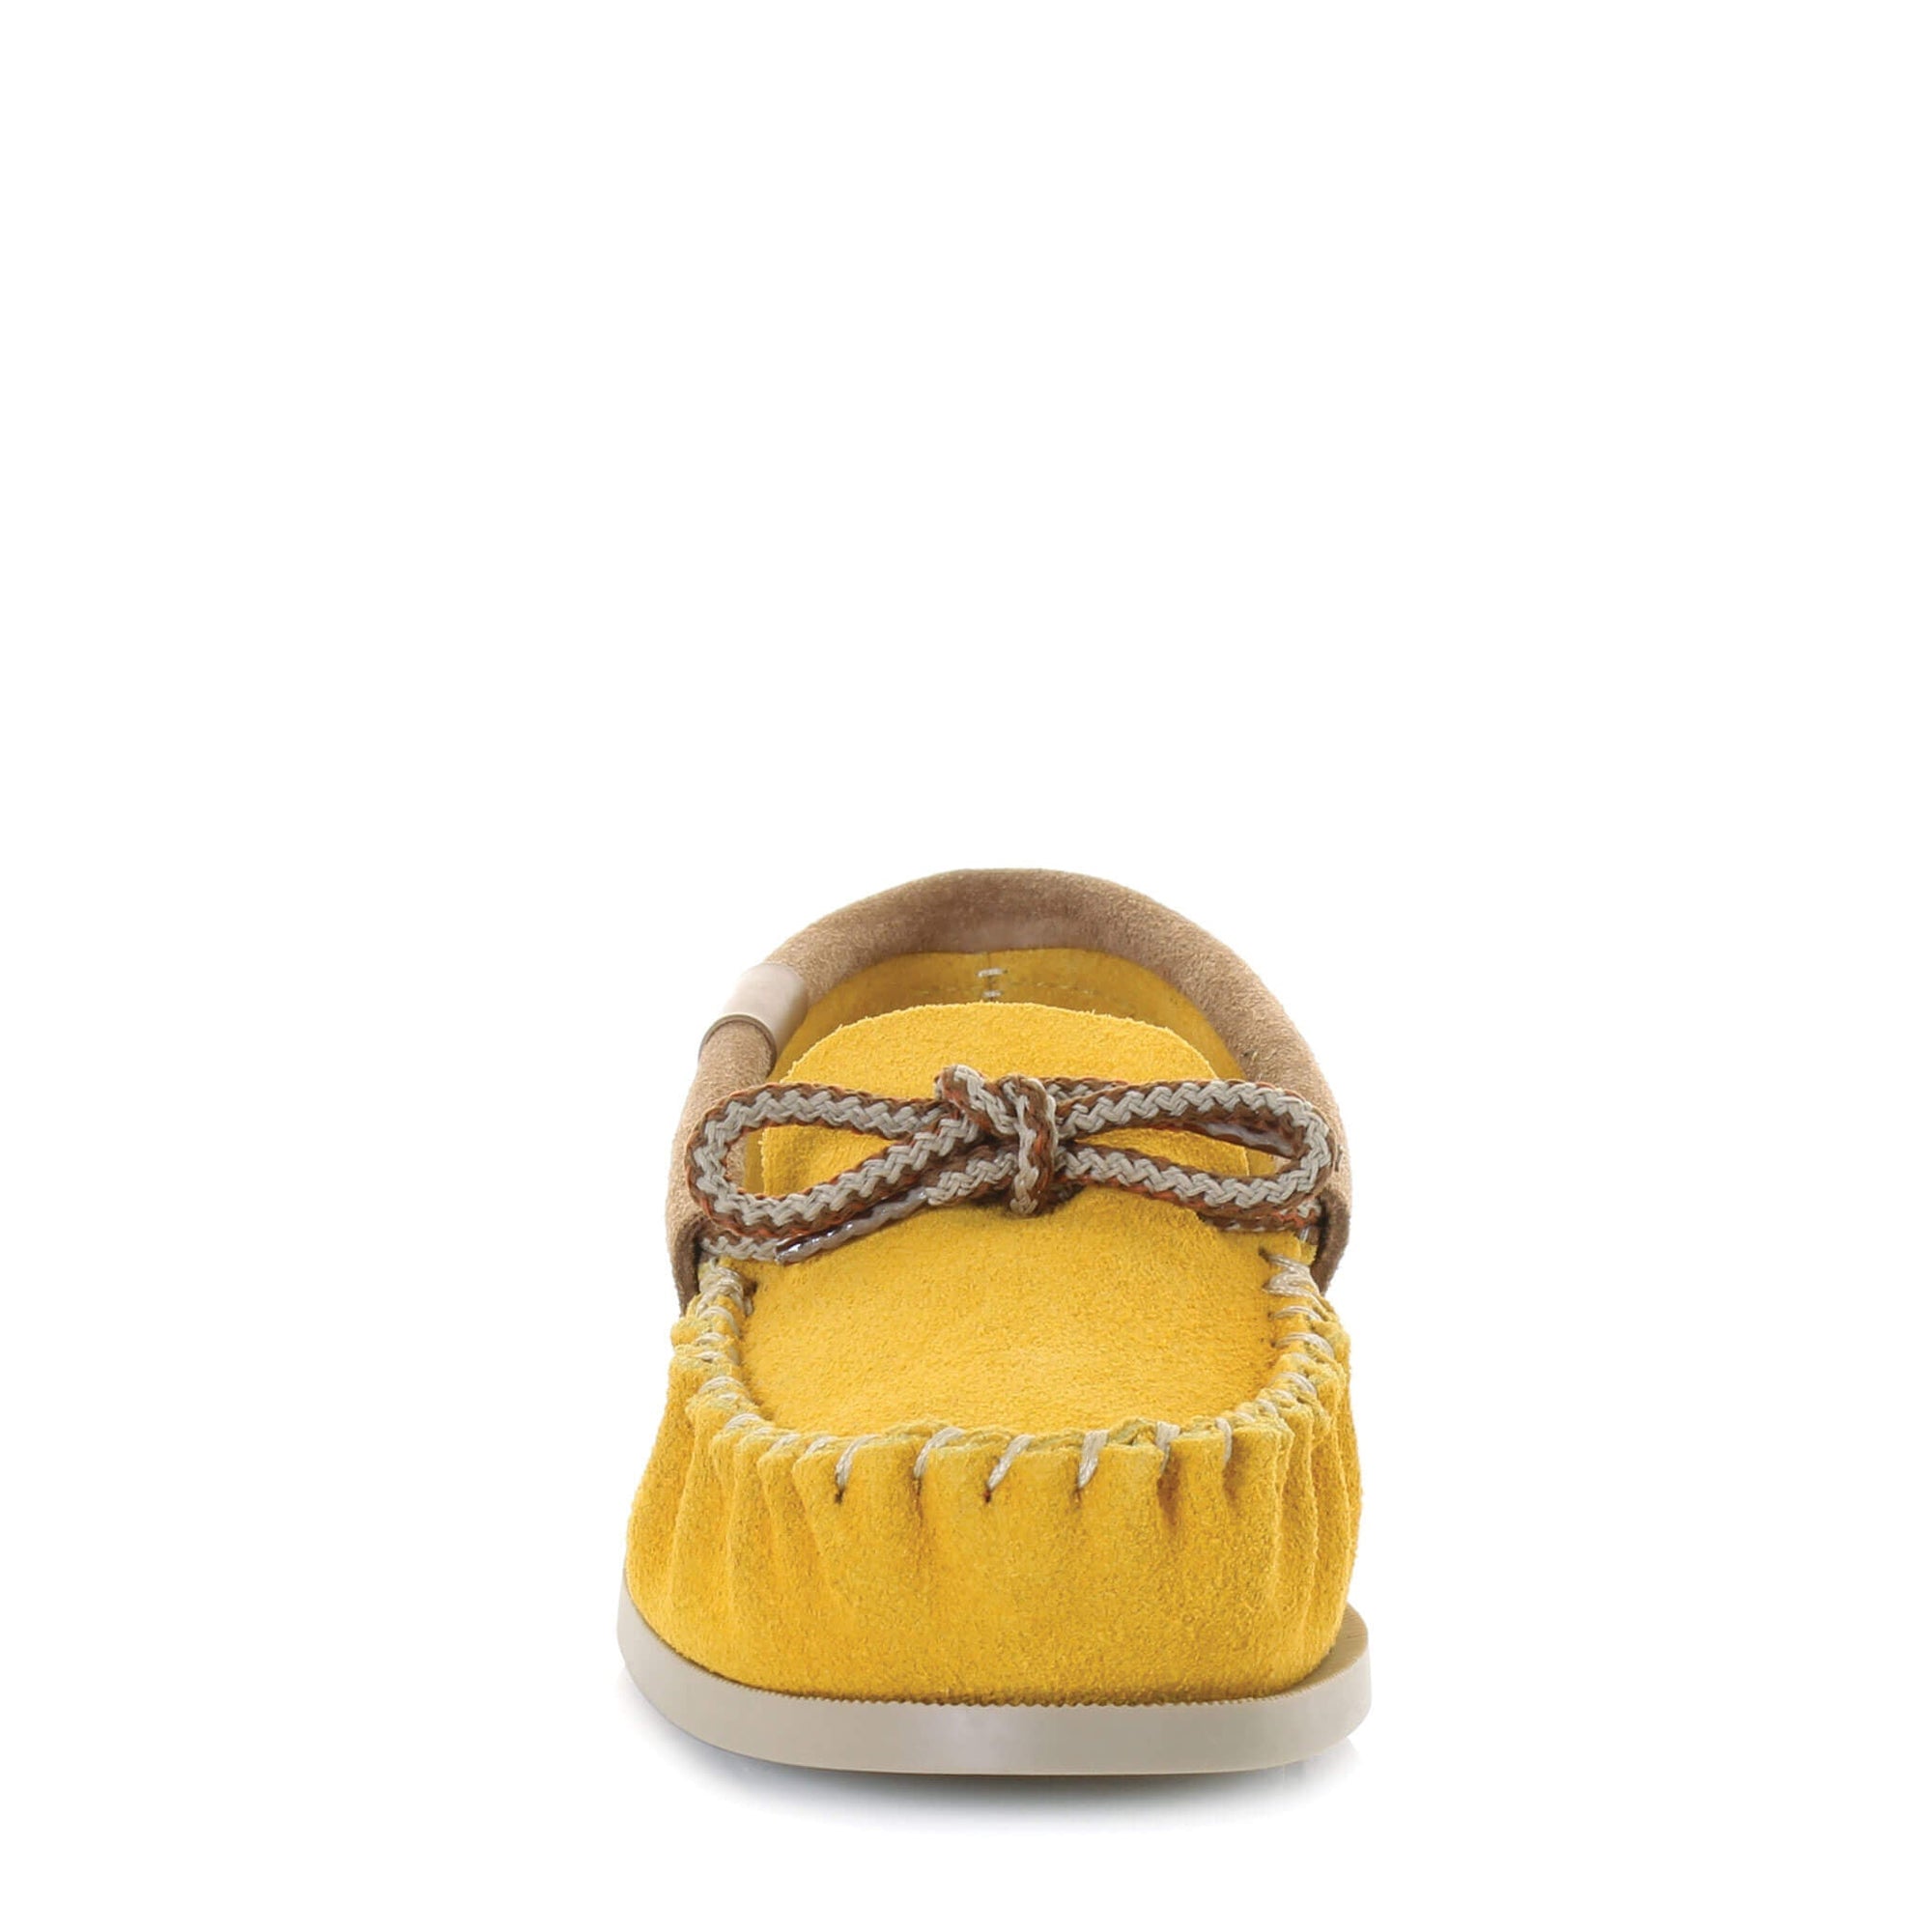 Canada Mocc Yellow Moccasin for Women